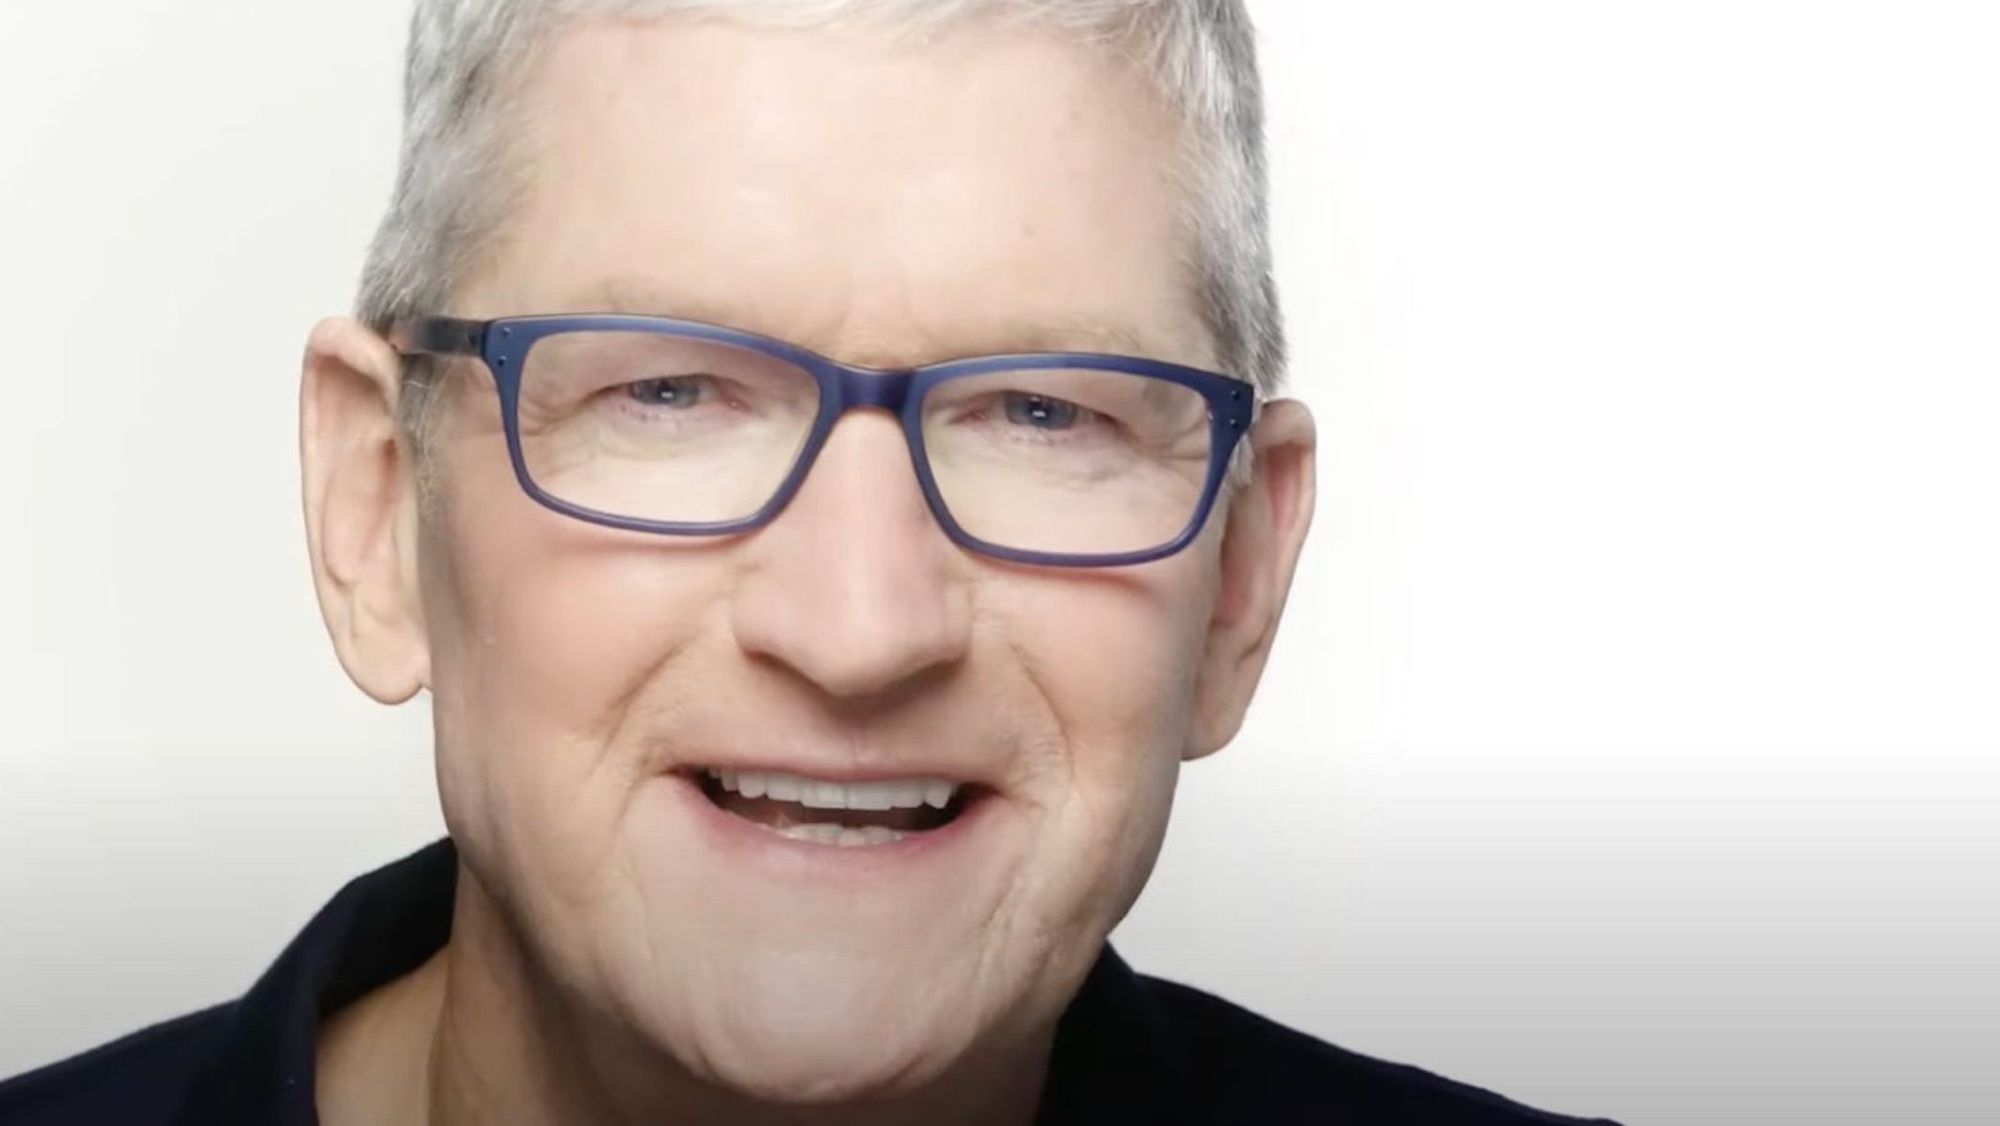 Tim Cook: Not Too Long From Now, You'll Wonder How You Led Your Life Without AR - MacRumors